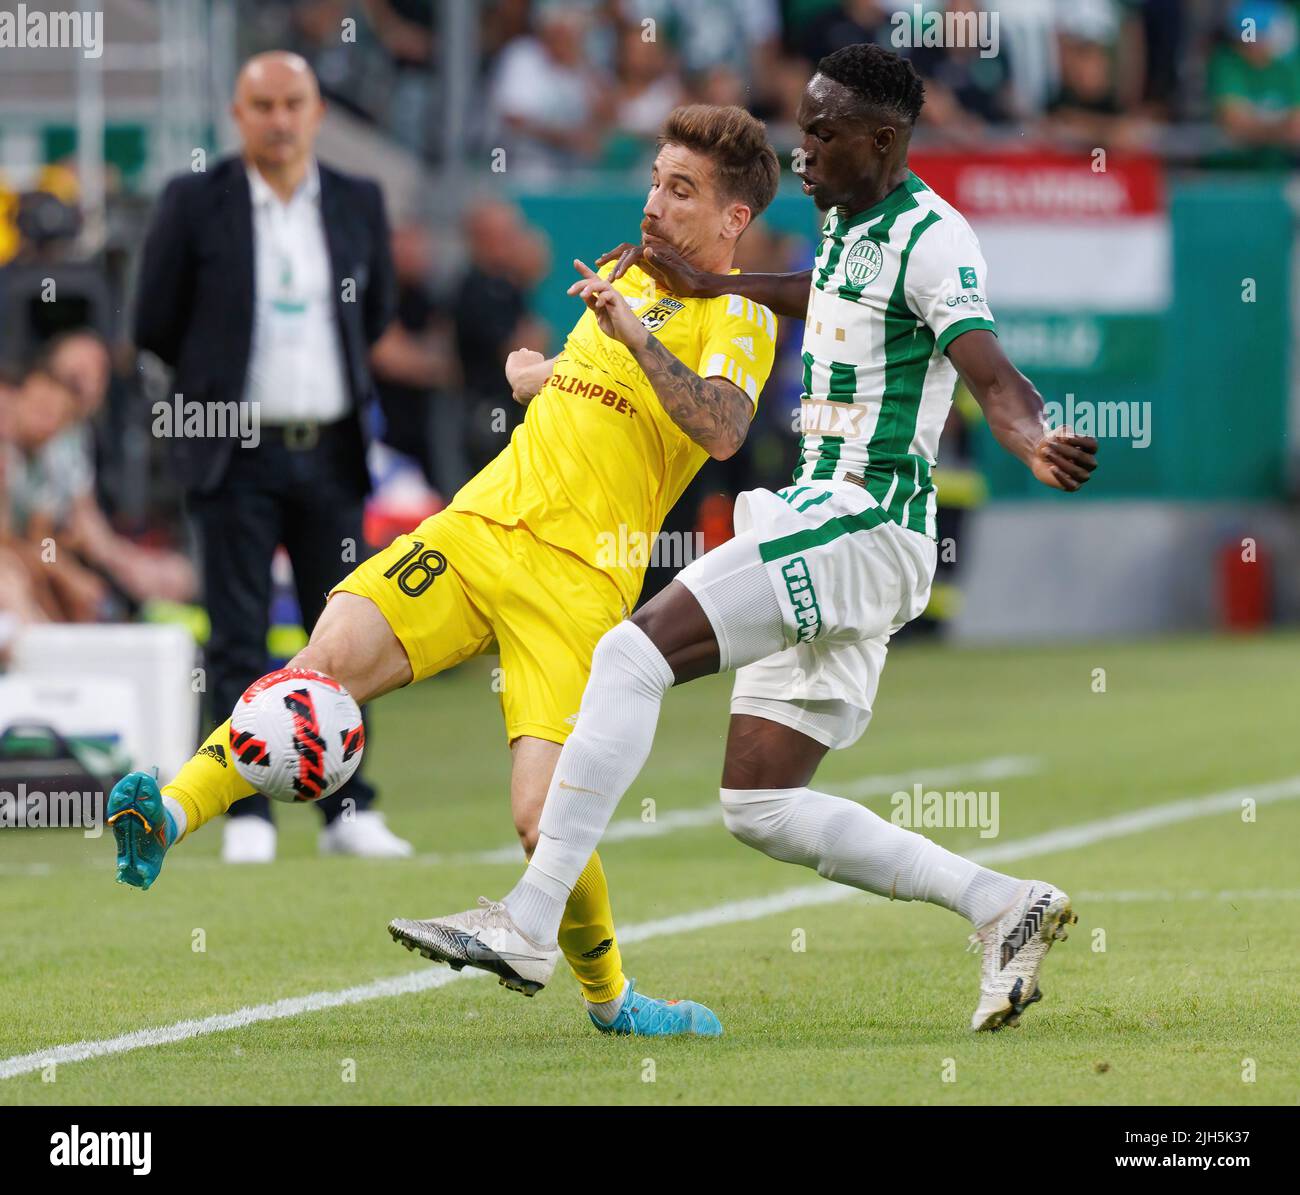 Adama Traore of Ferencvarosi TC scores during the UEFA Champions News  Photo - Getty Images